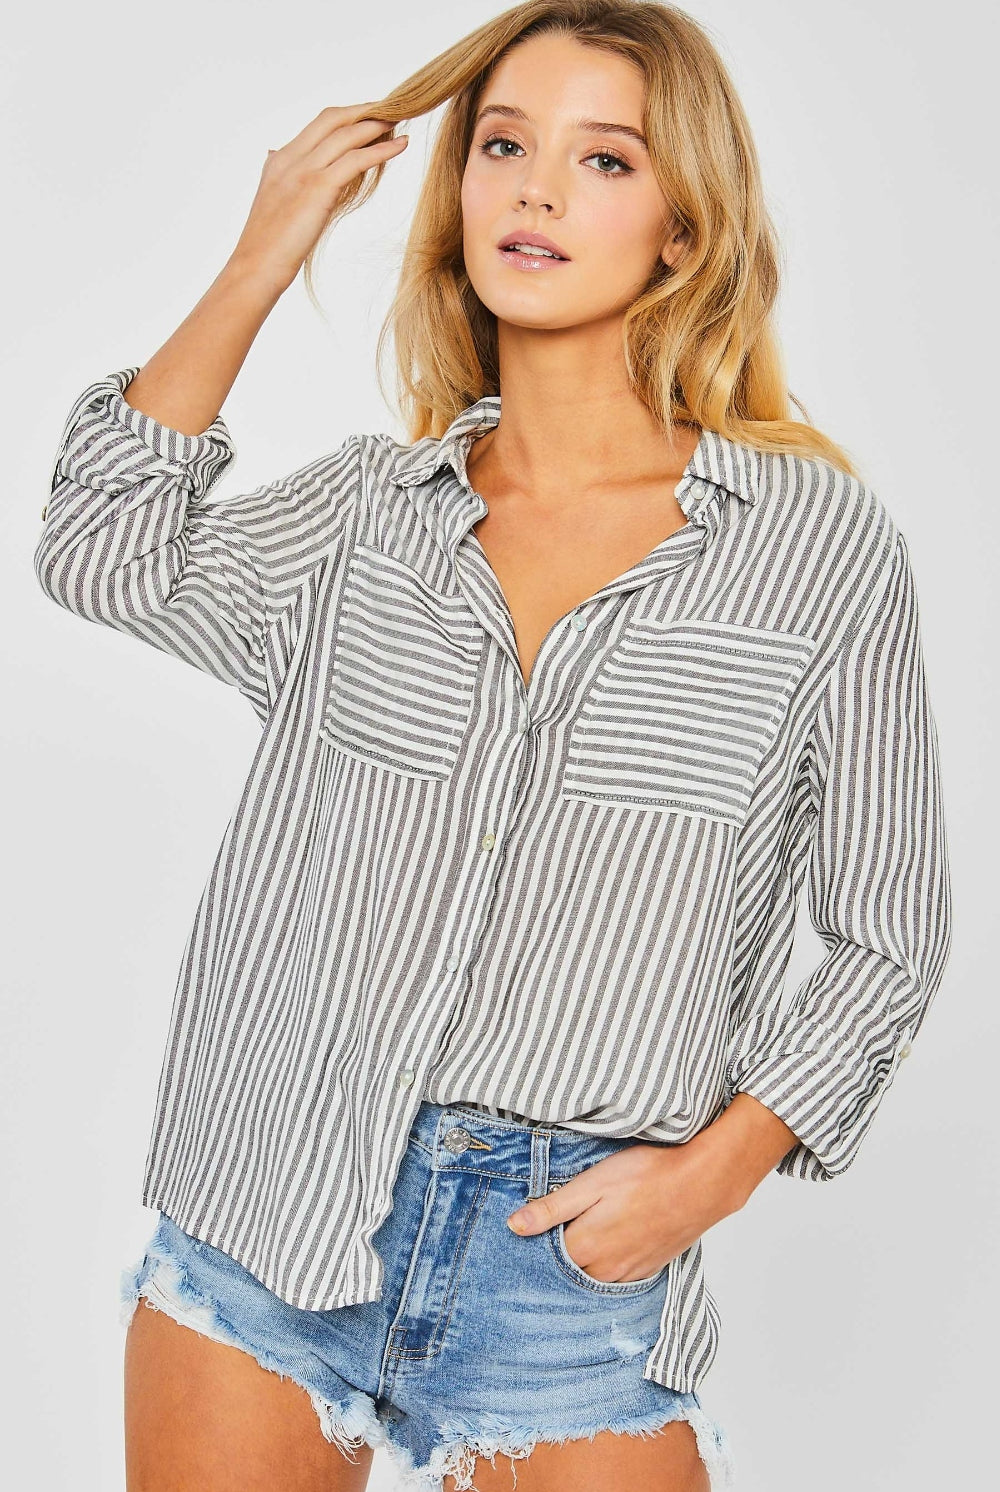 Elegant black and white striped long sleeve shirt with collar detail from GemThreads Boutique.